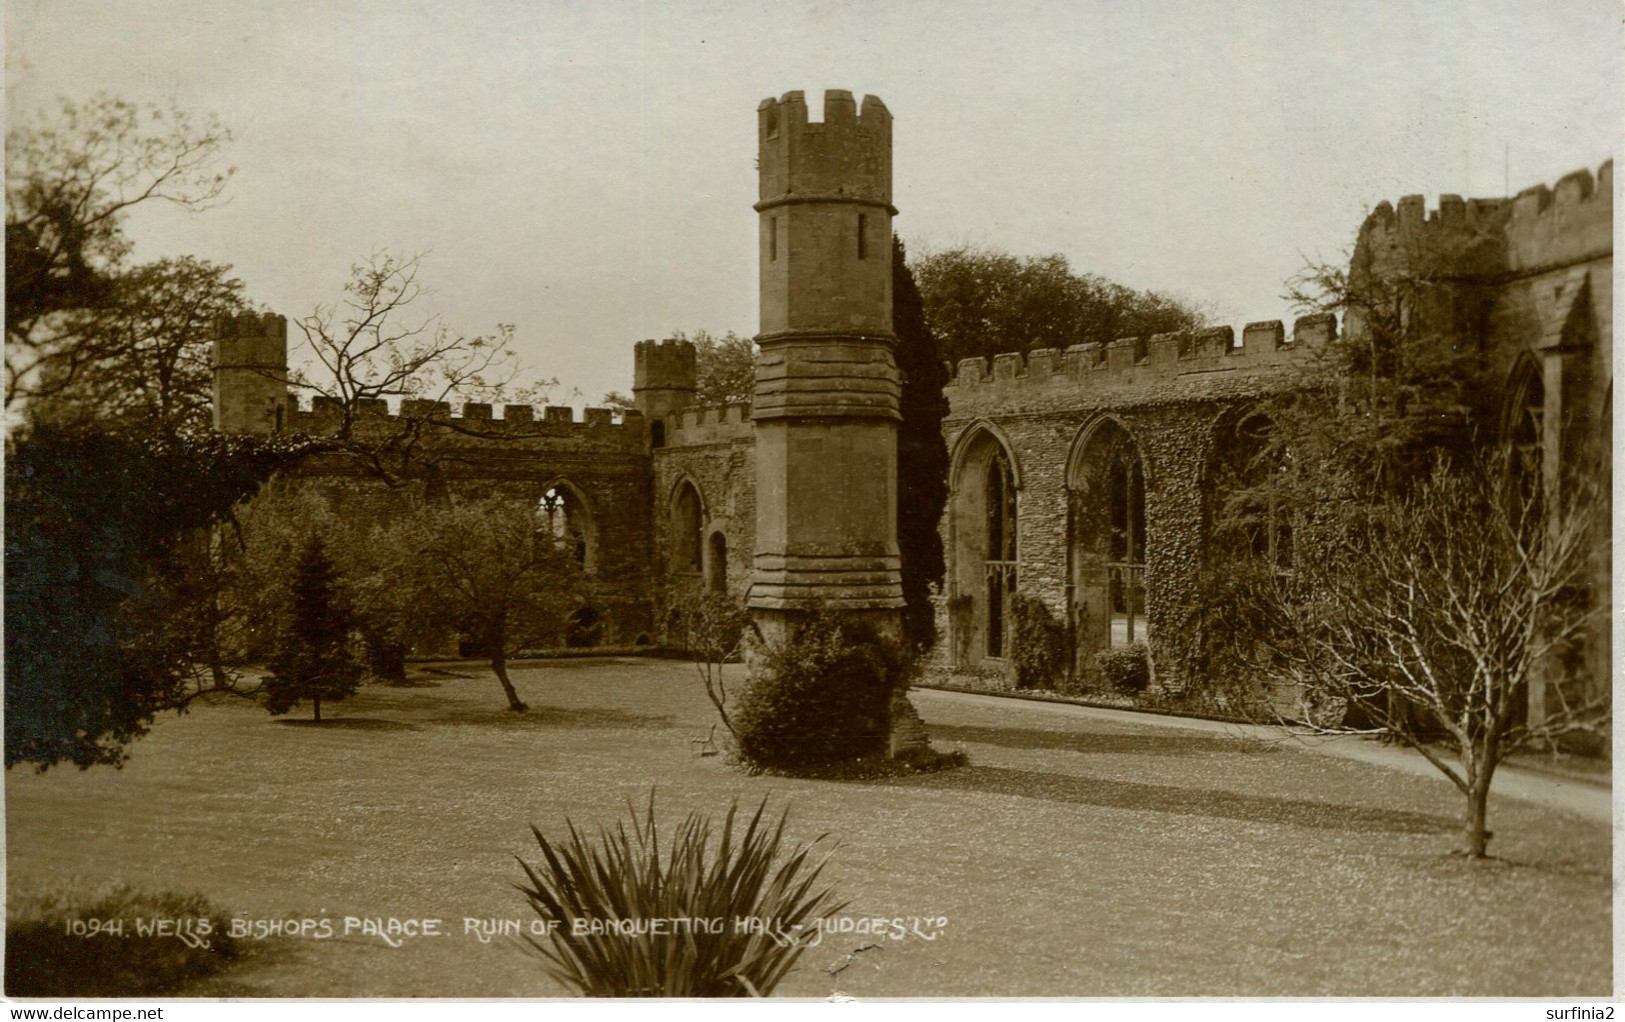 SOMERSET - WELLS - BISHOPS PALACE - RUINS OF BANQUETTING HALL RP Som690 - Wells